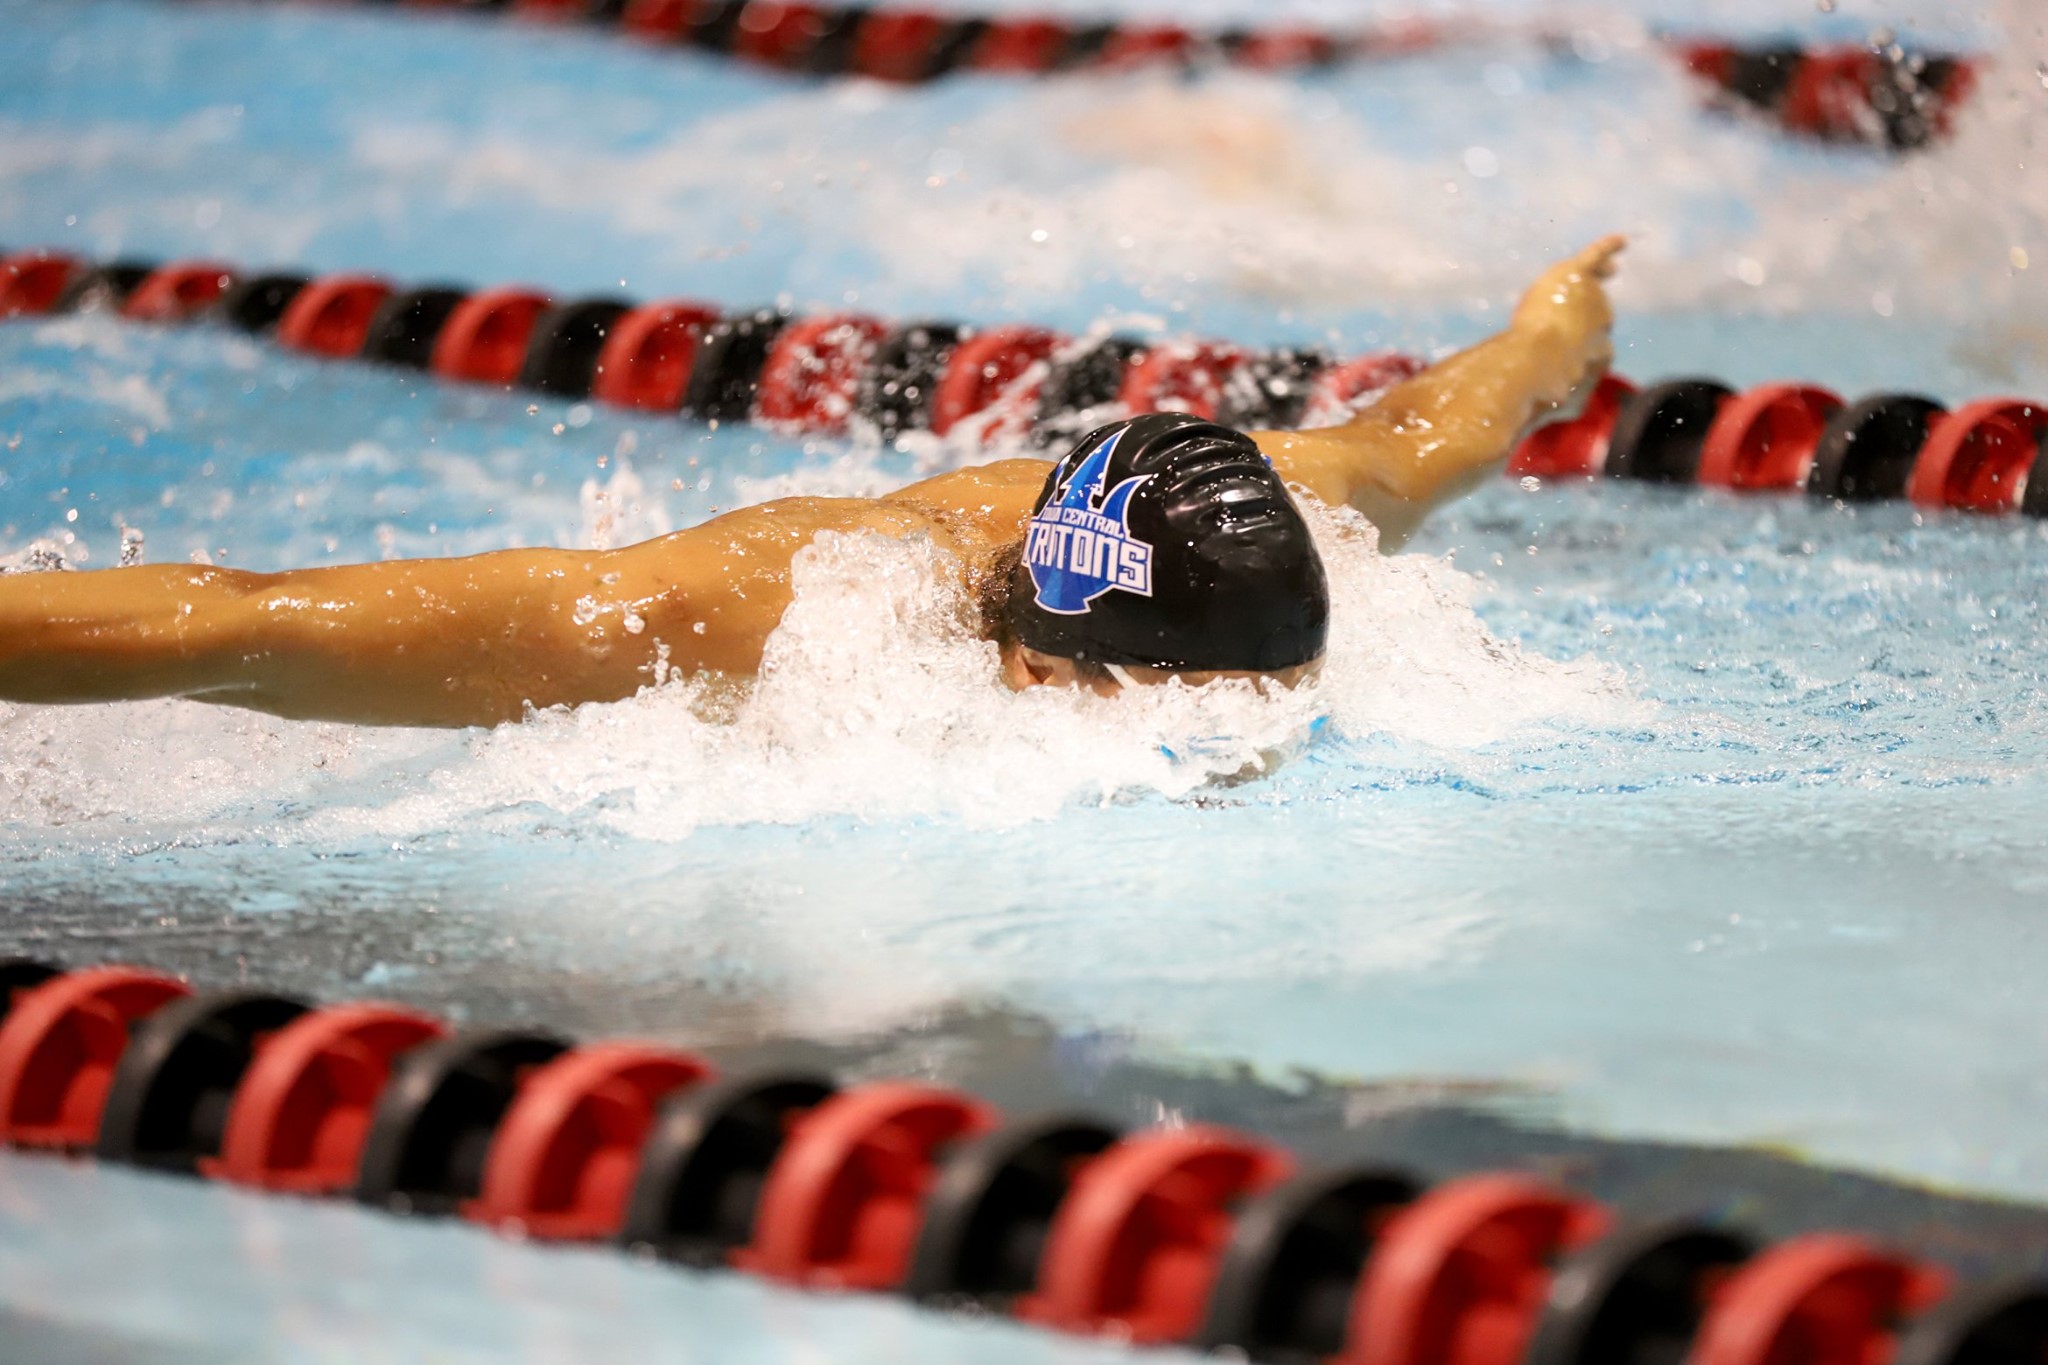 Tritons continue to shine in the pool